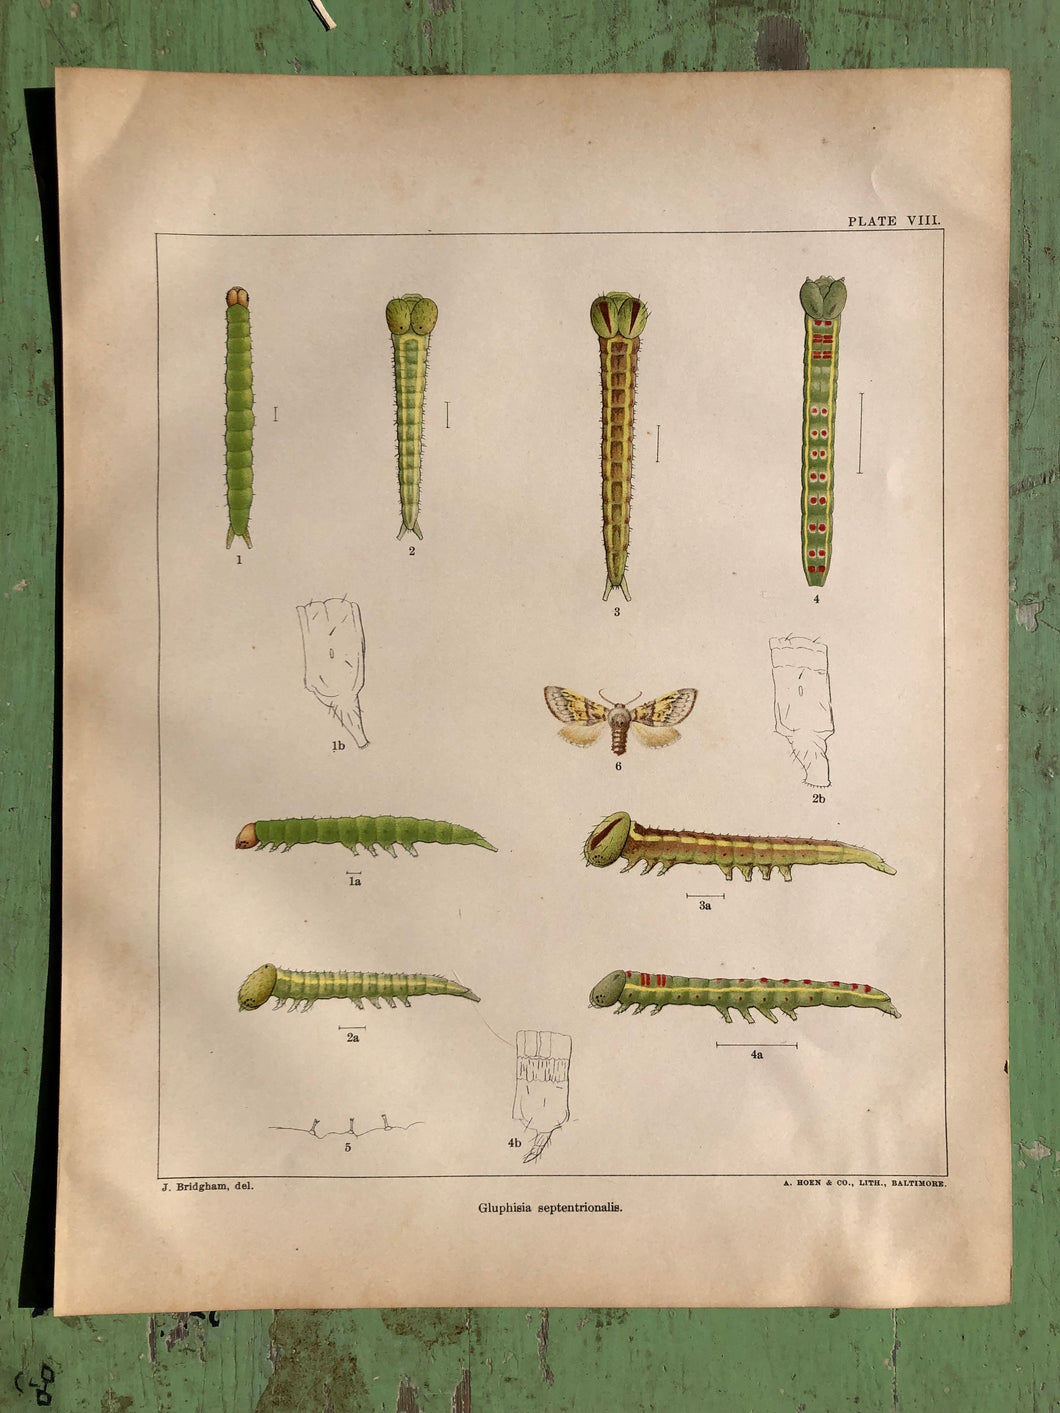 Plate VIII from 